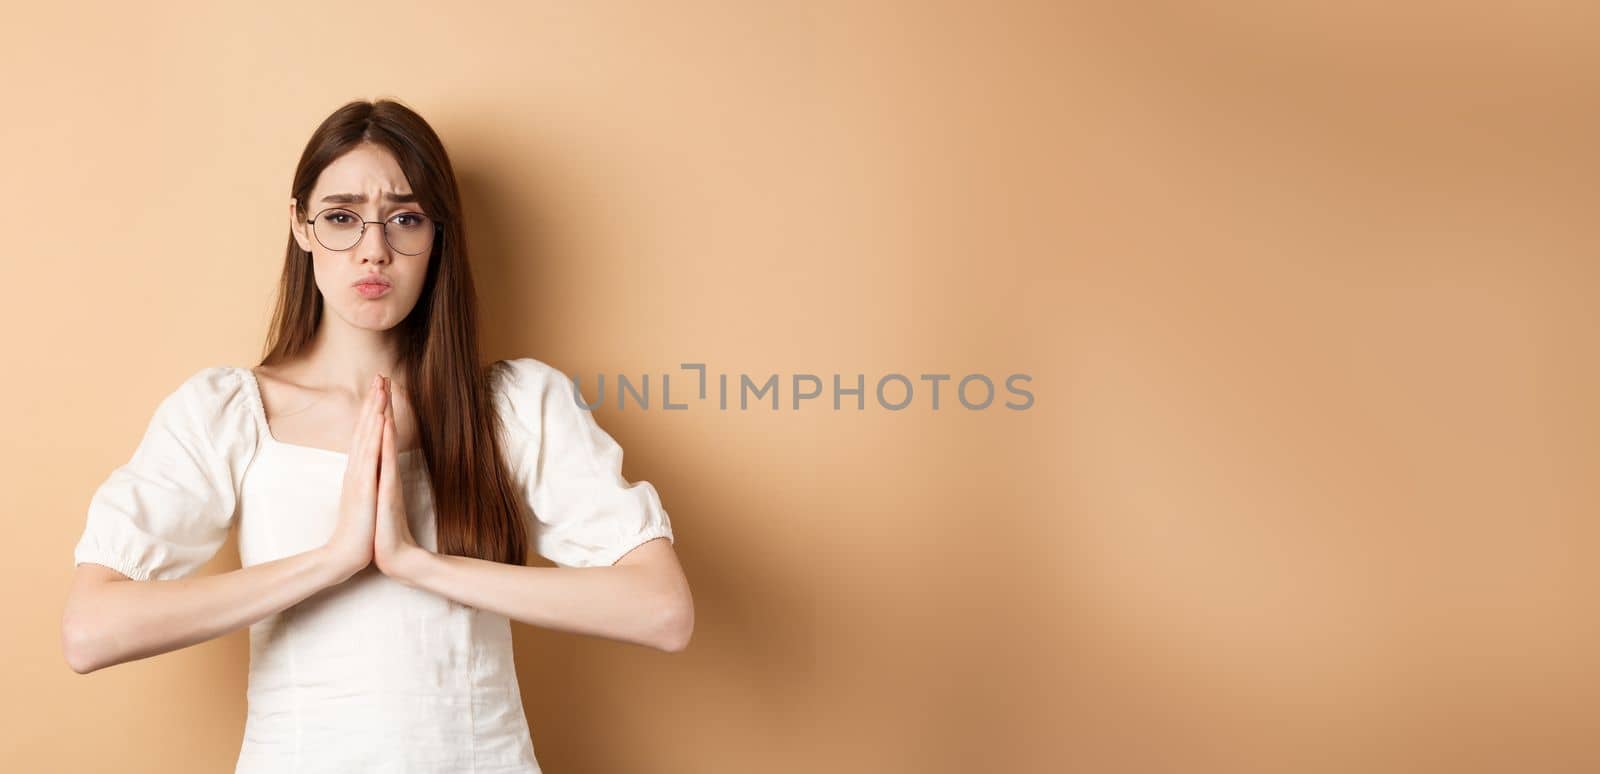 Sad girl in glasses begging for help, say please and looking cute, need favour, standing on beige background.